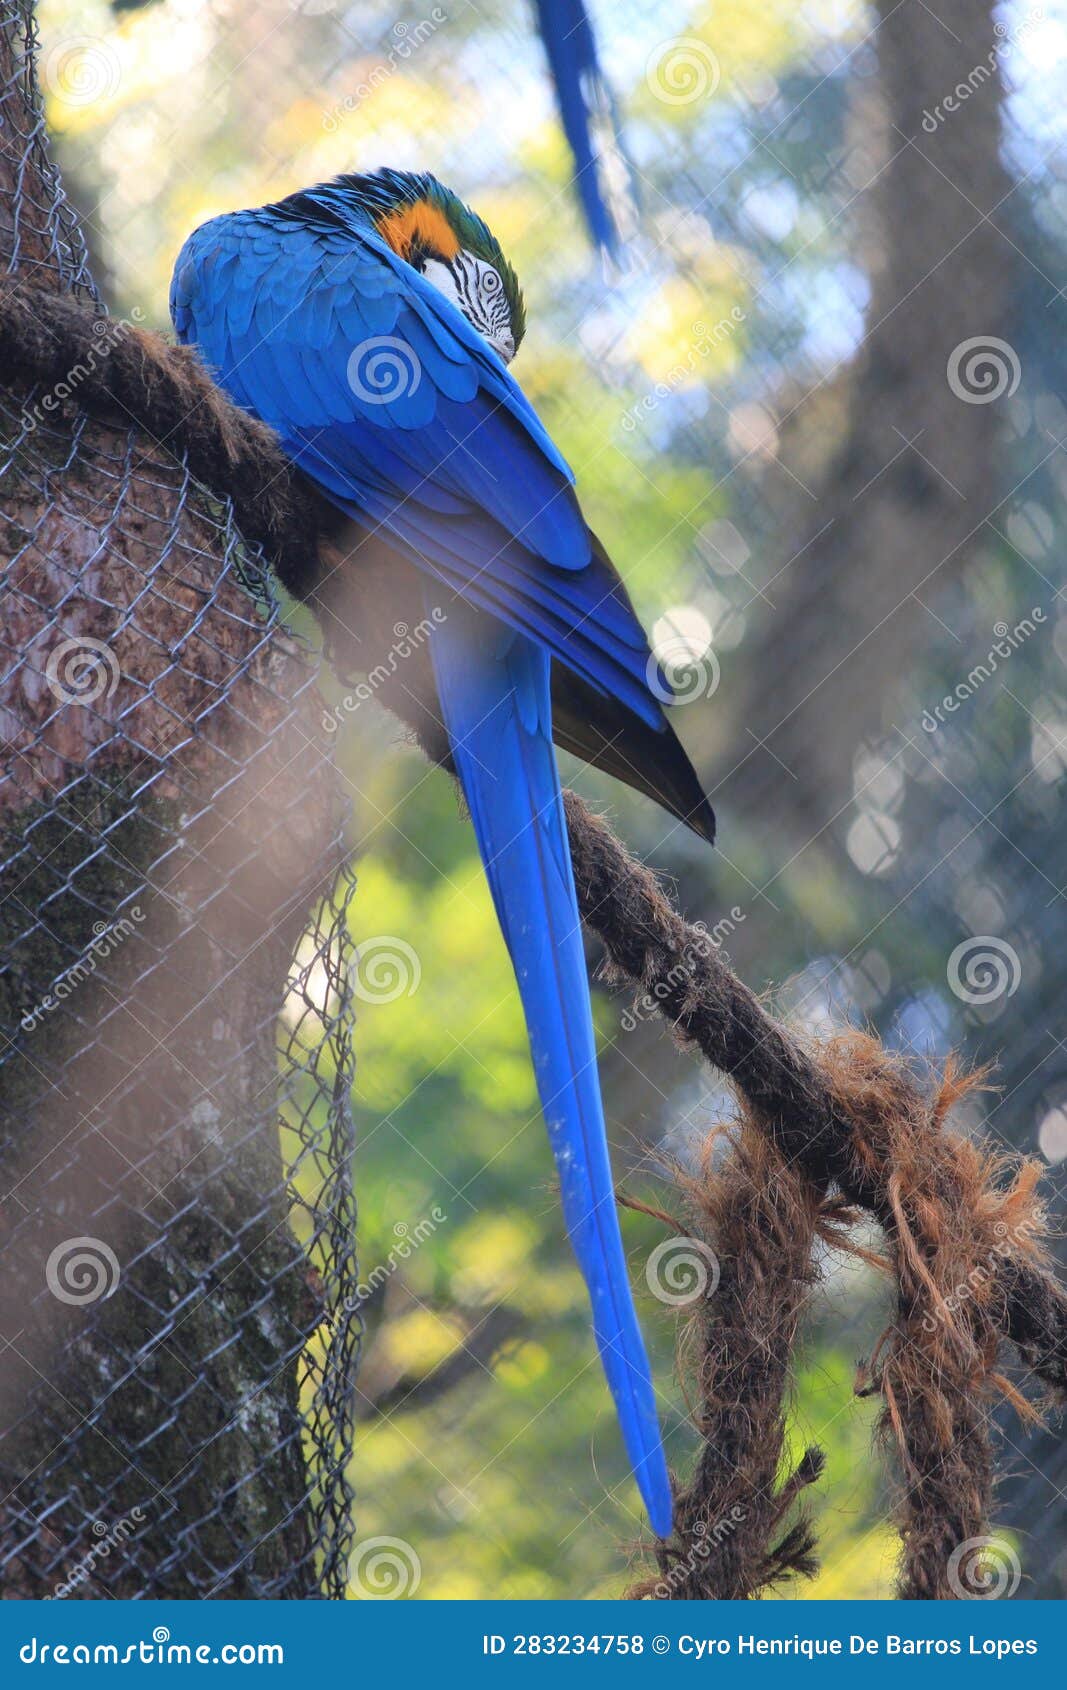 blue and yellow macaw preening